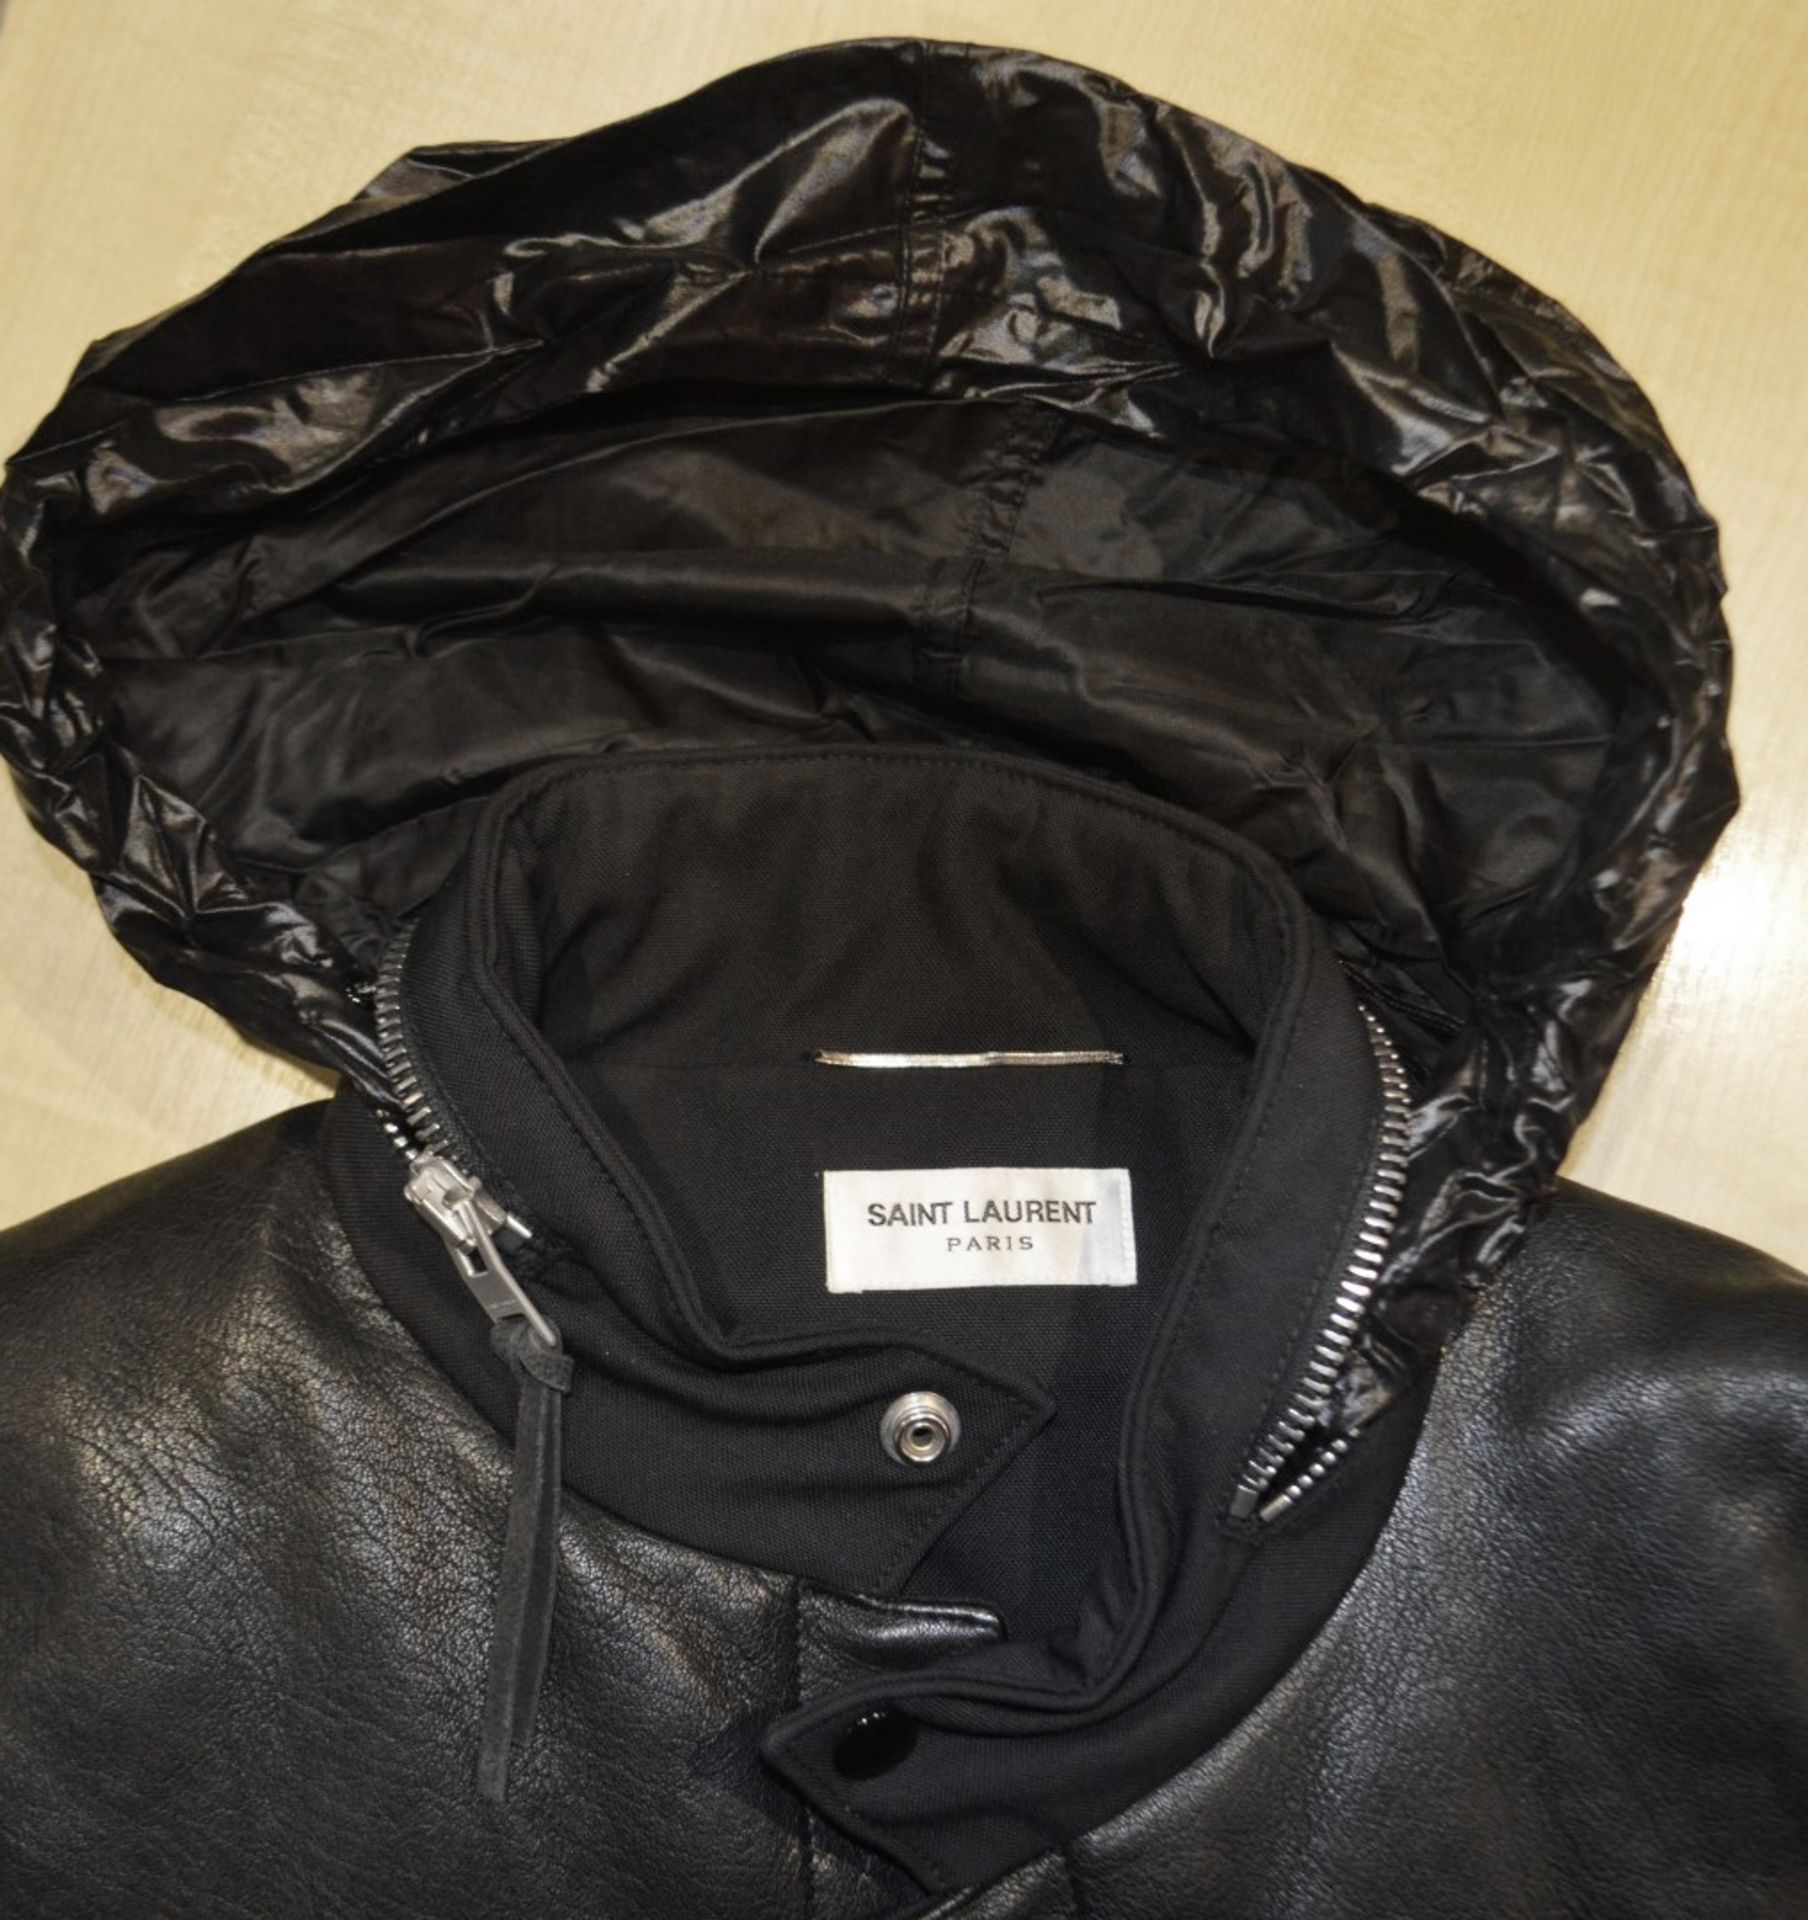 1 x Men's Genuine Yves Saint Laurant Gillet / Body Warmer In Black With Leather Panelling - Image 8 of 8